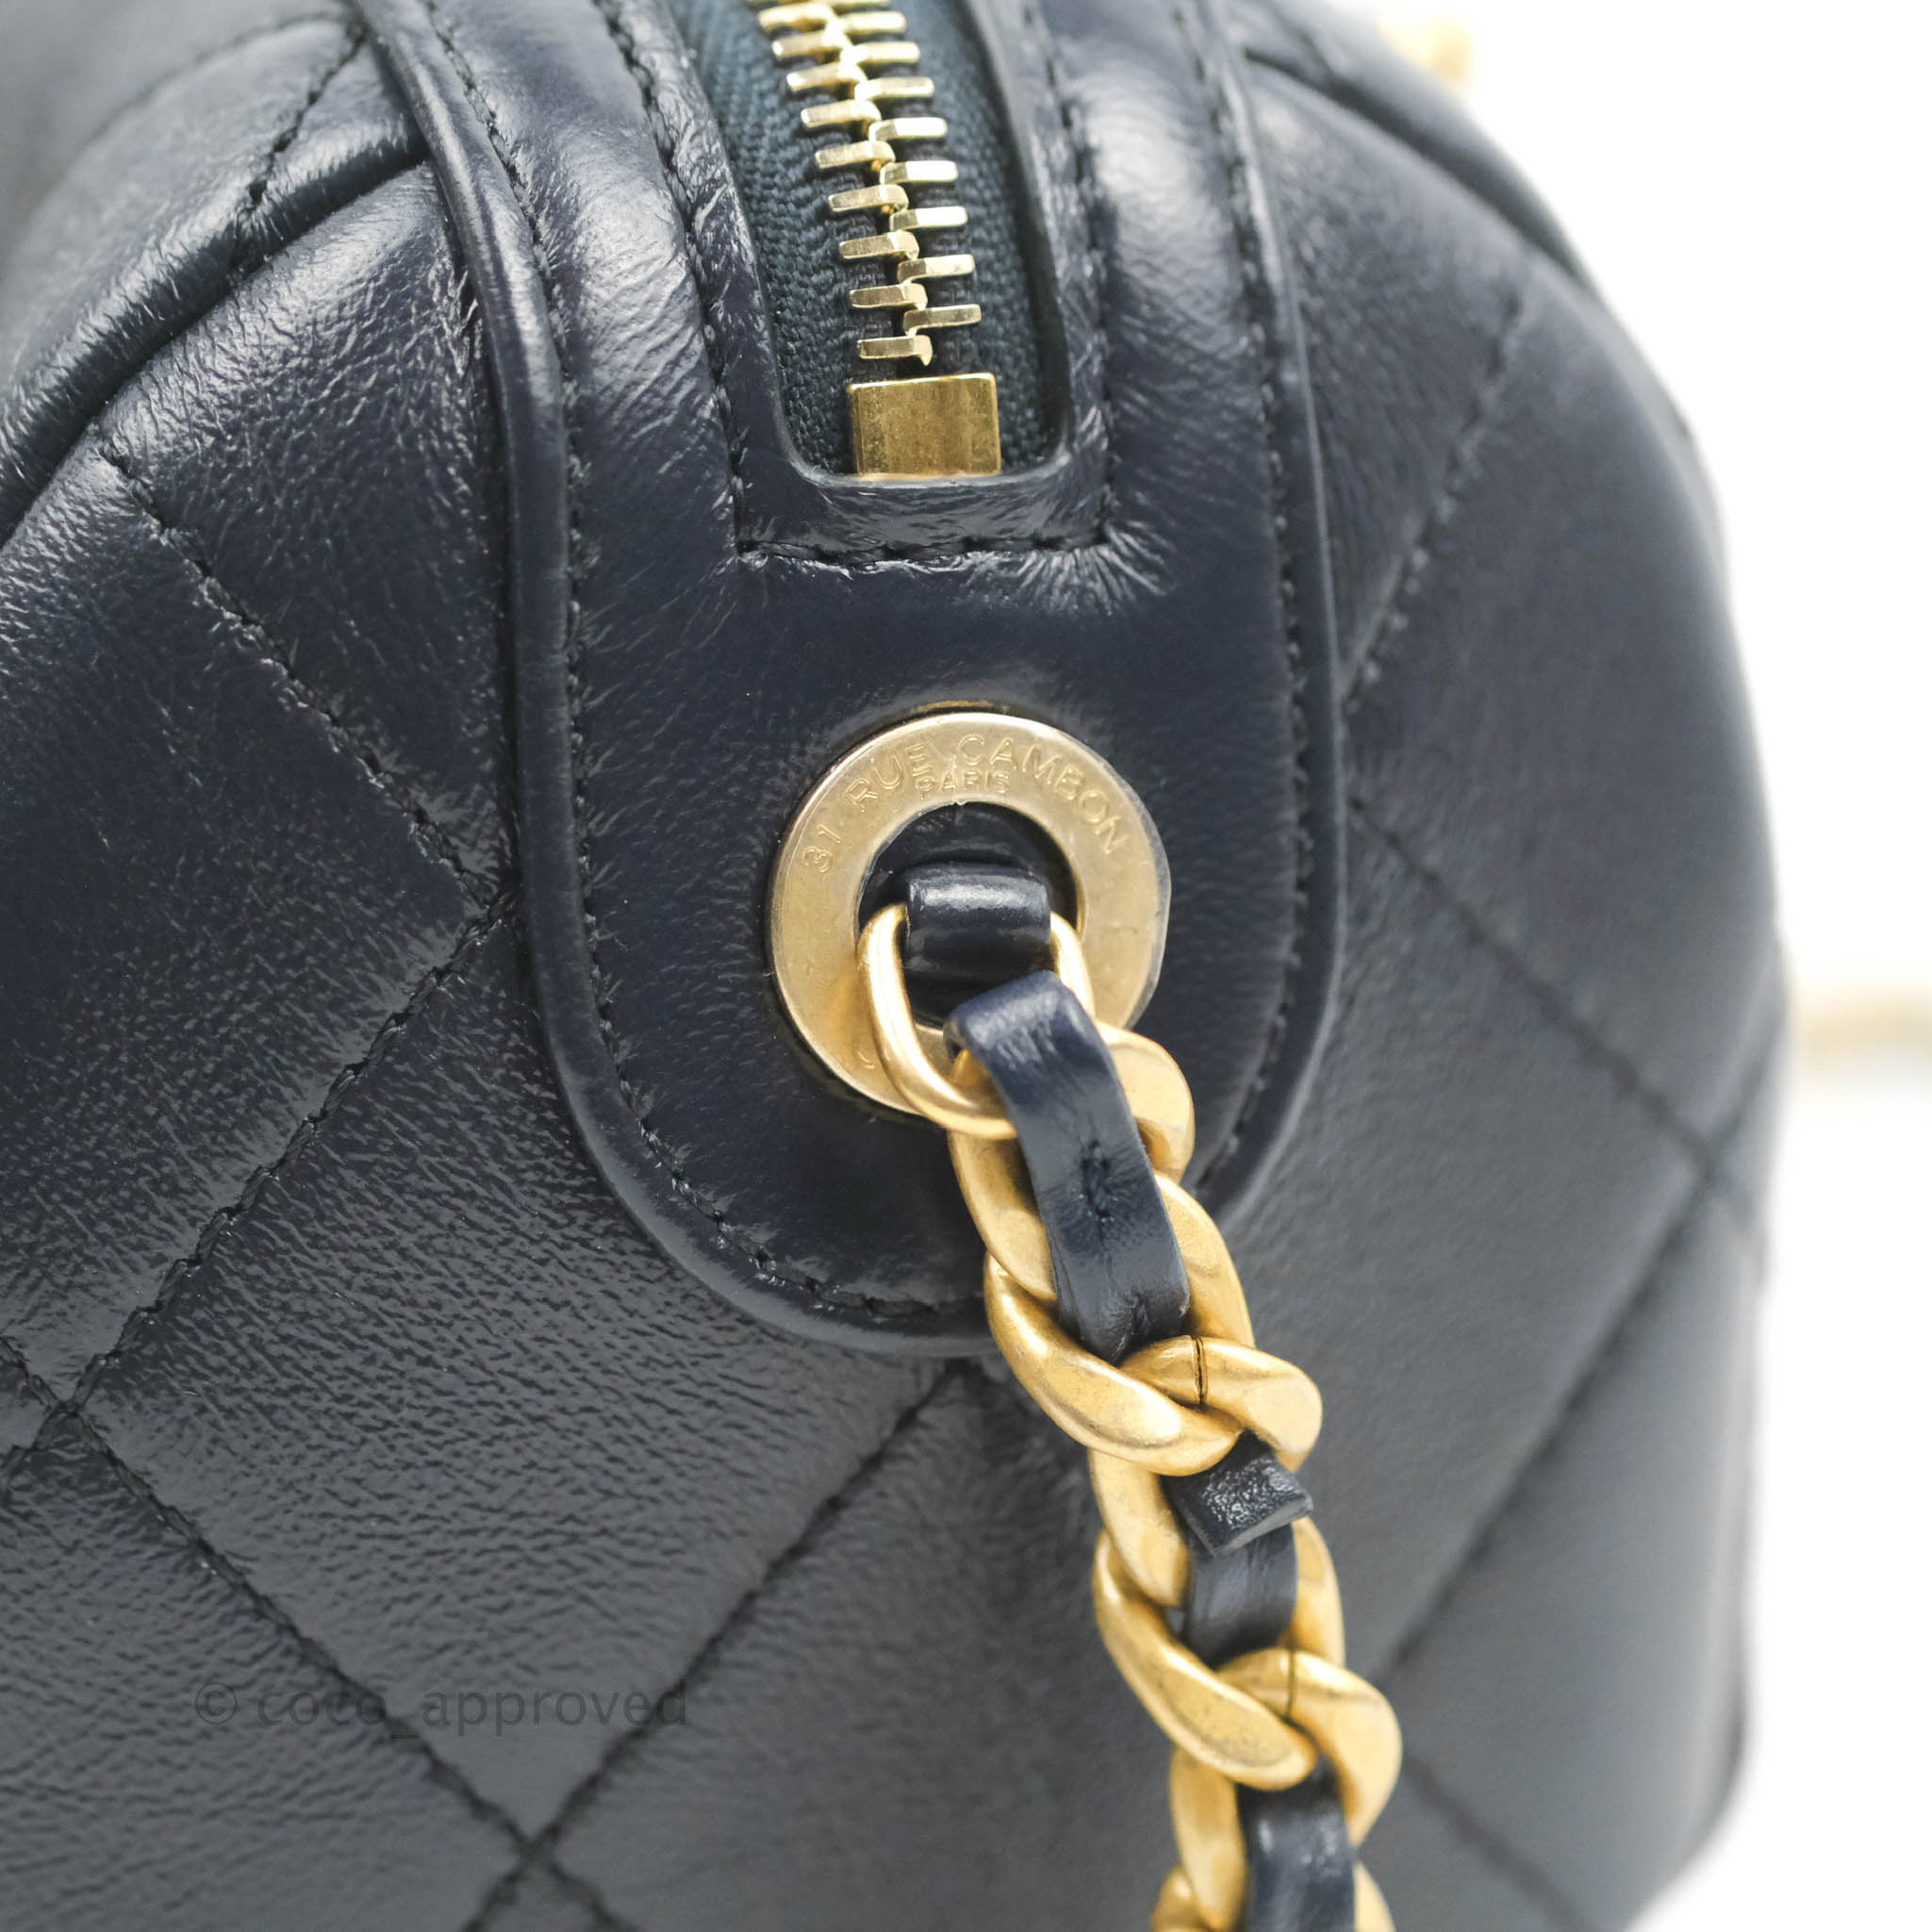 CHANEL Shiny Lambskin Quilted Small Fashion Therapy Bowling Bag Black  581033